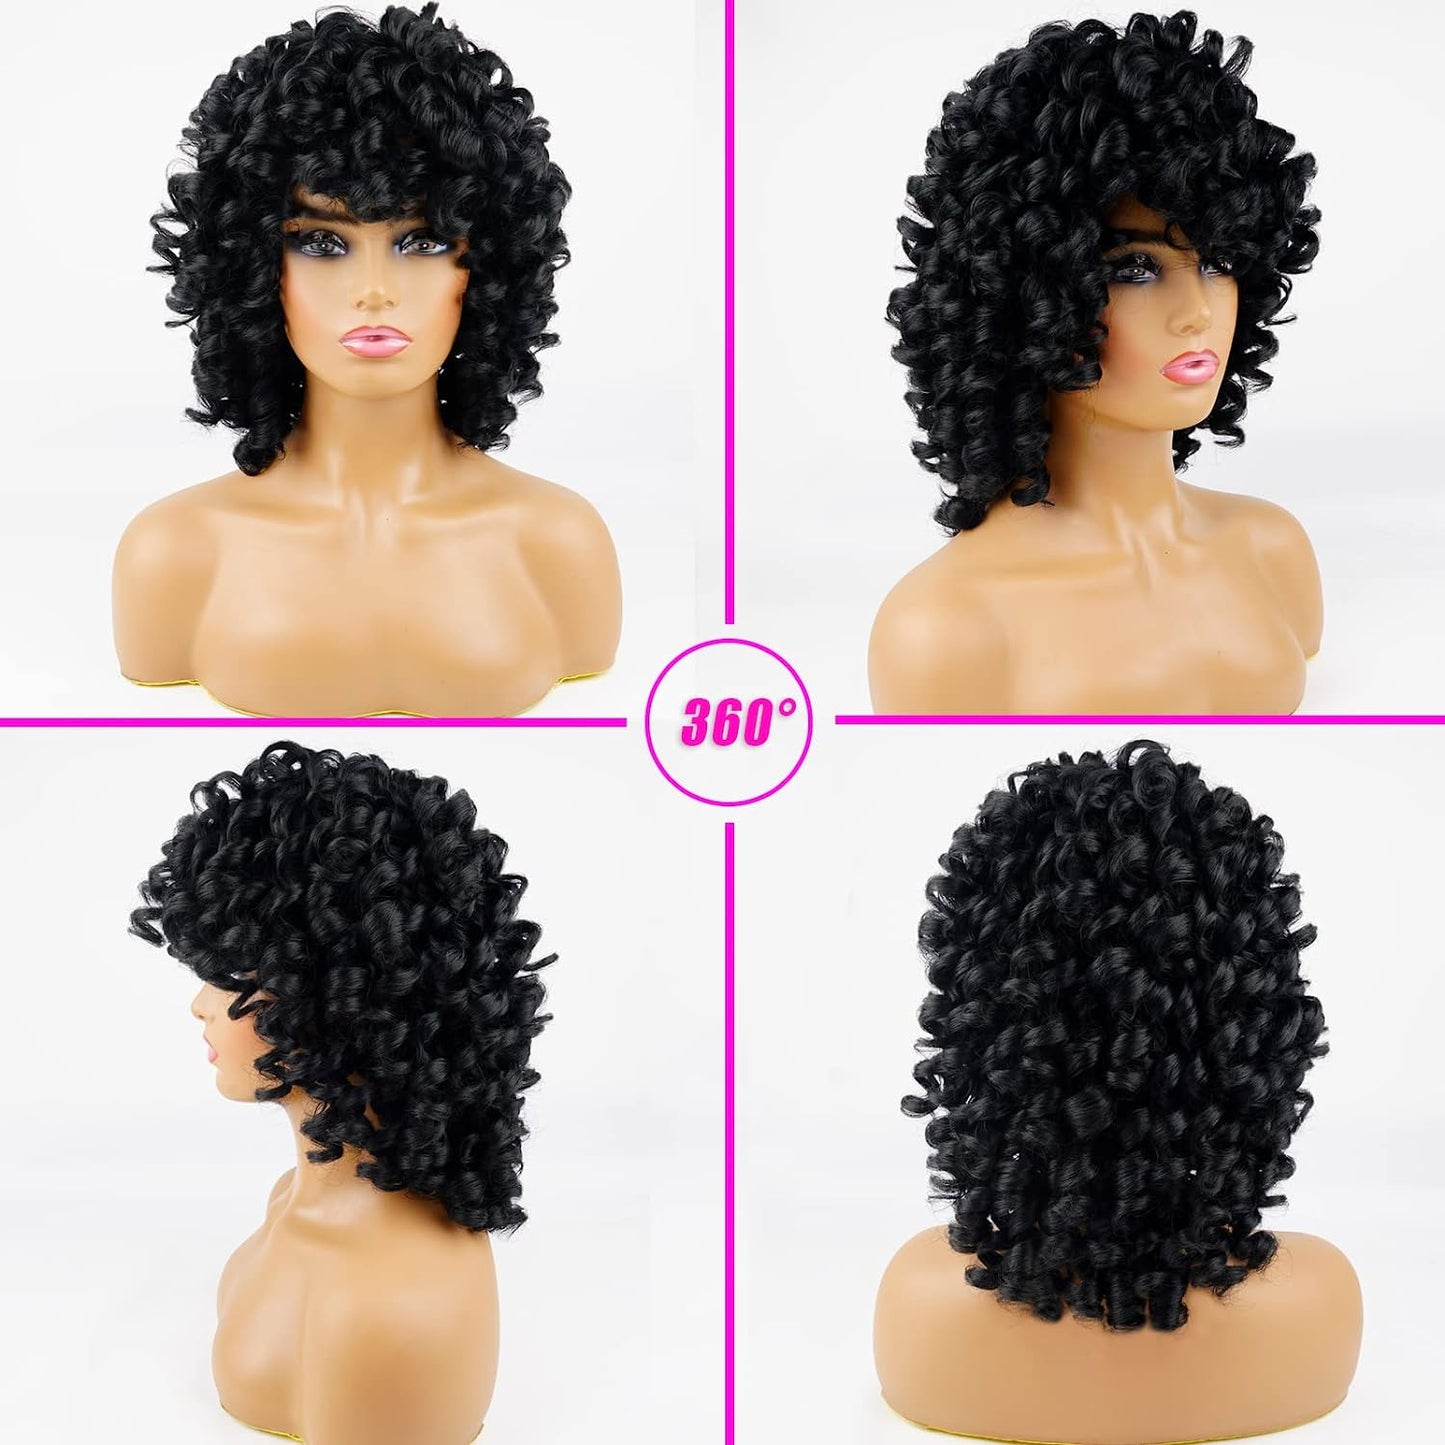 Black Afro Short Curly Wig With Bangs